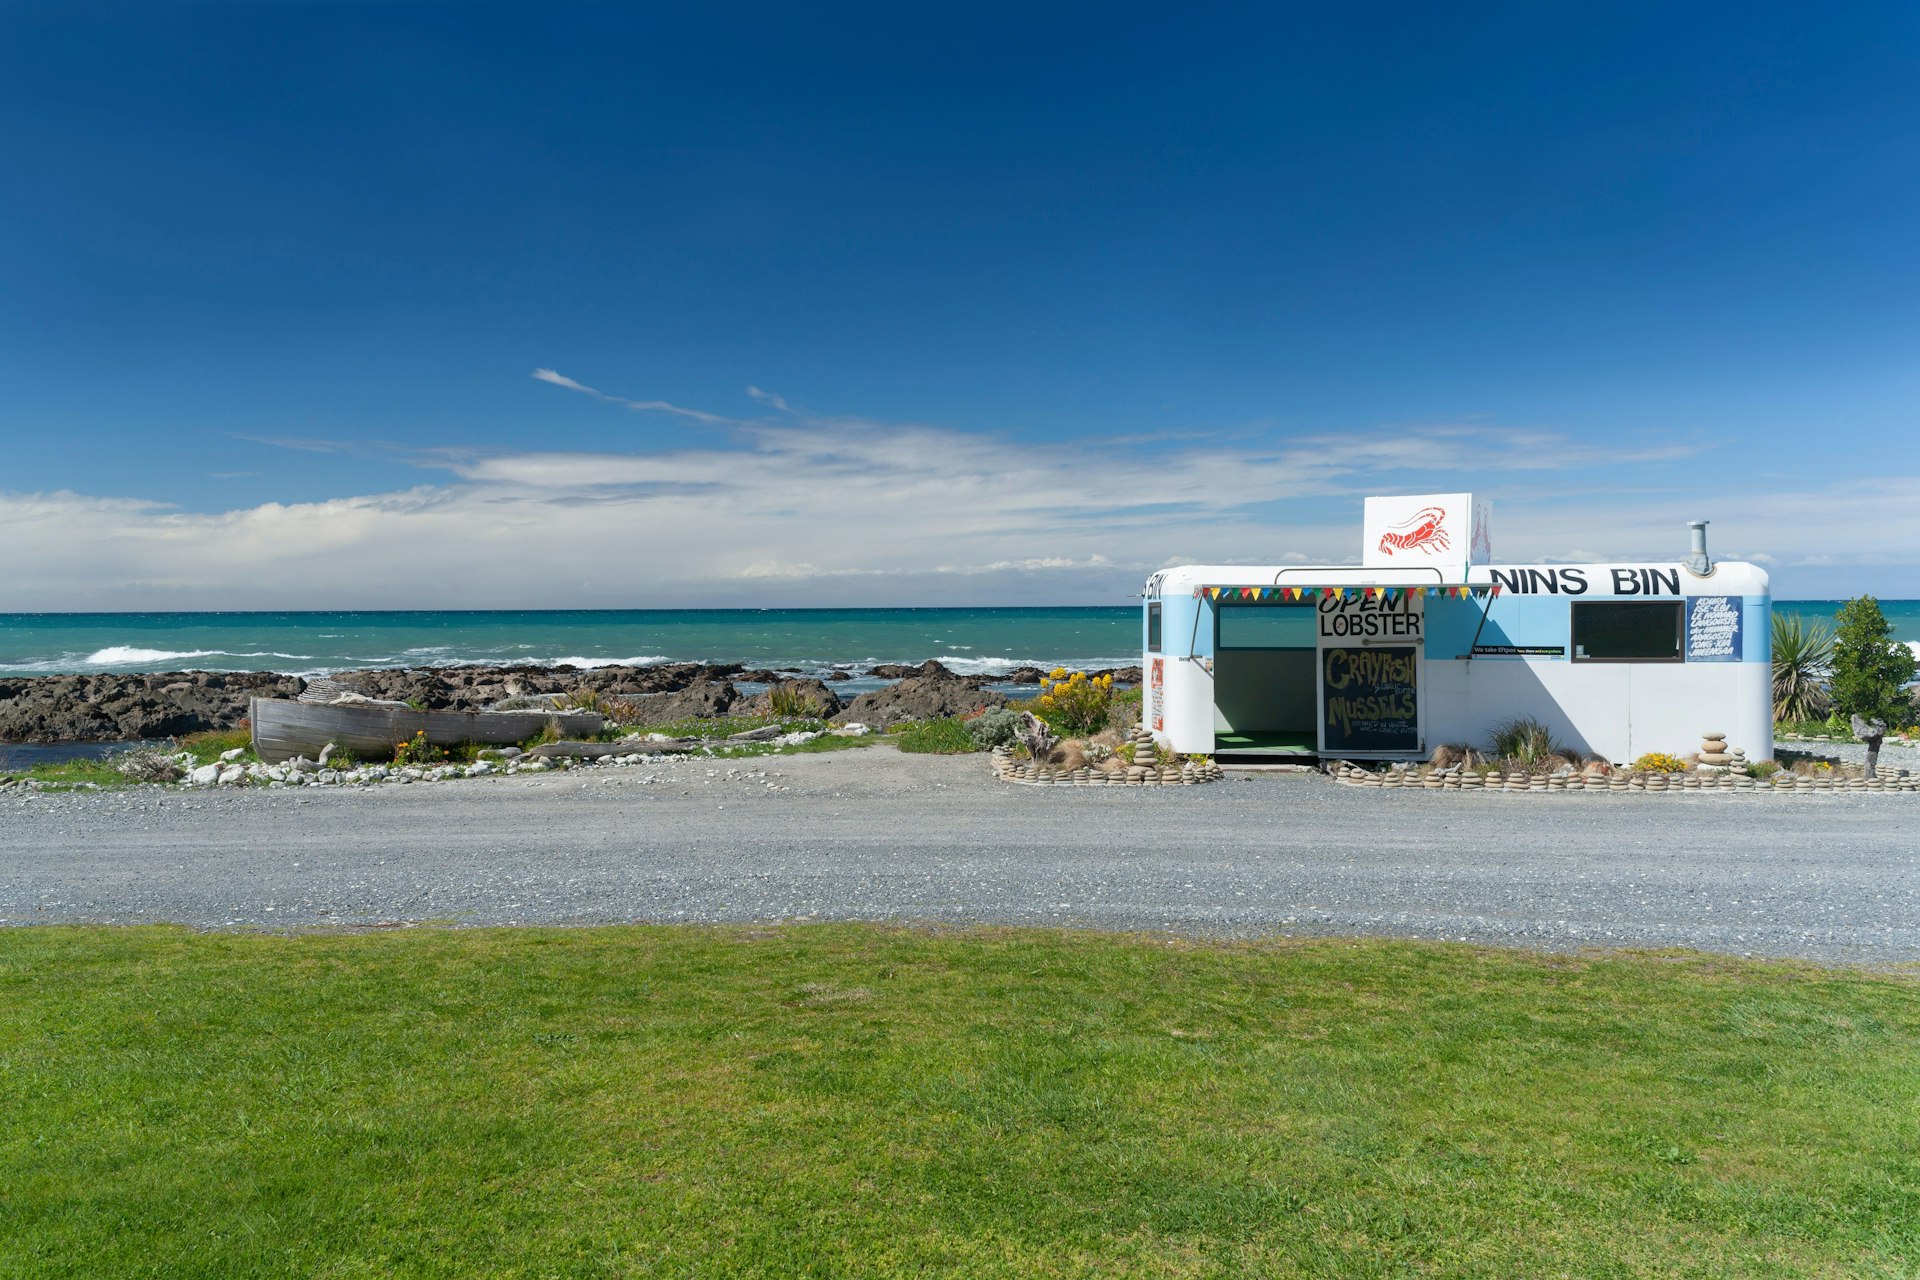 A roadside seafood restaurant in a blue truck with the coastline in the background. 